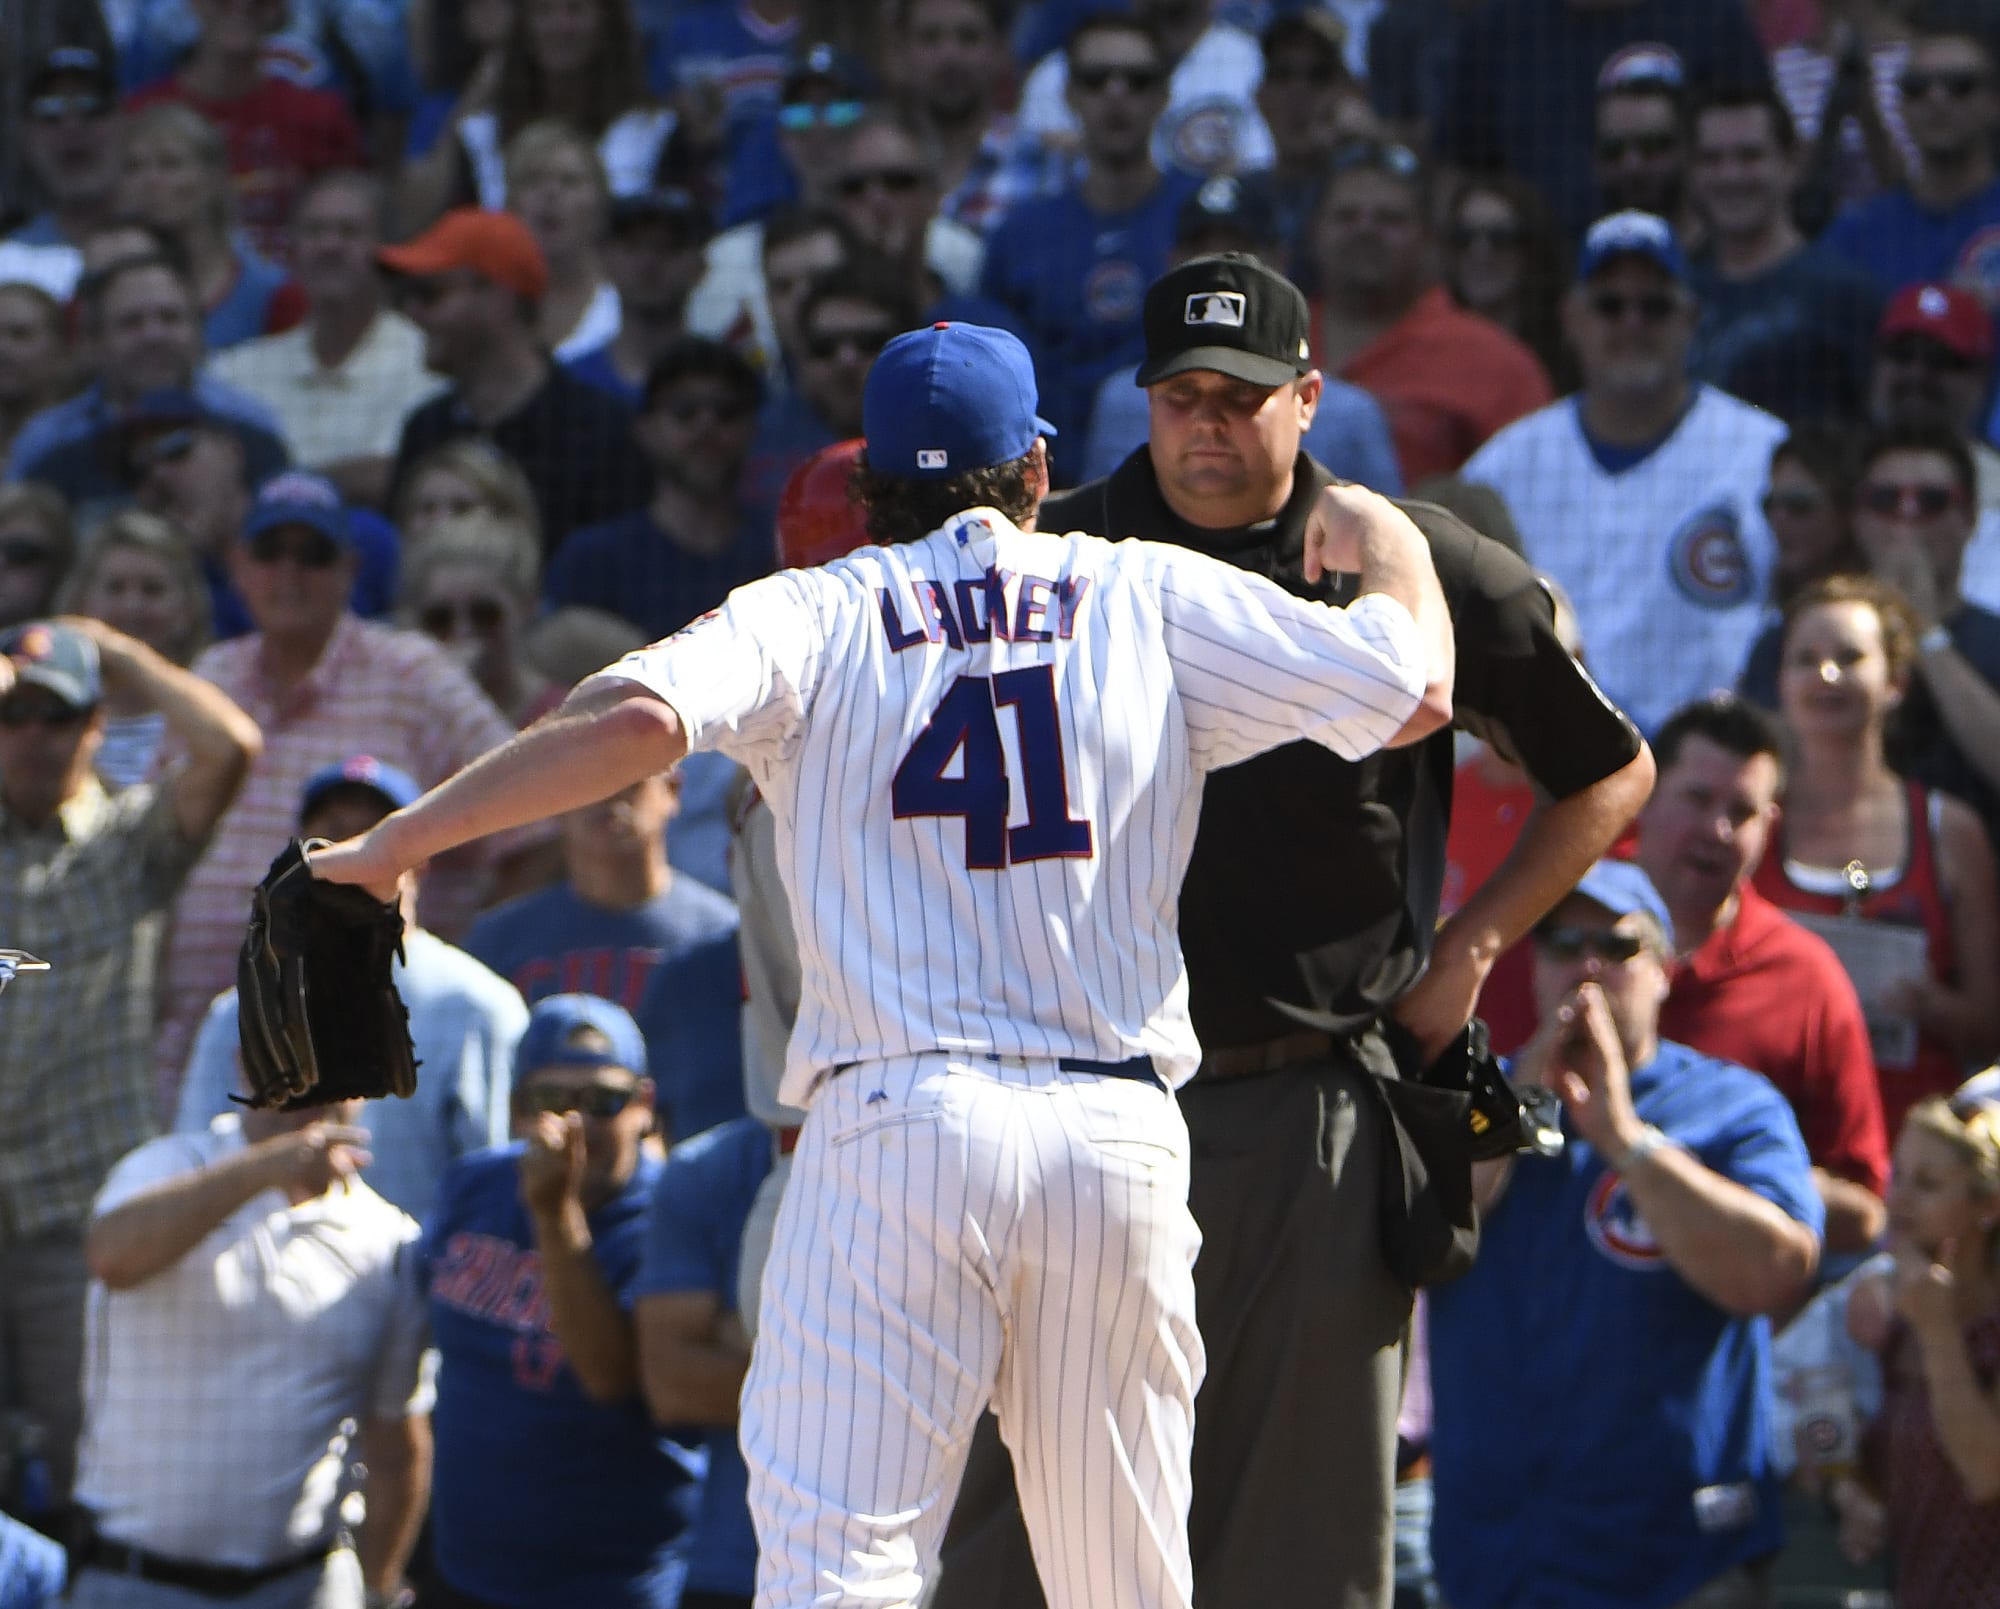 Chicago Cubs News: Just your typical Cubs vs. Cards game